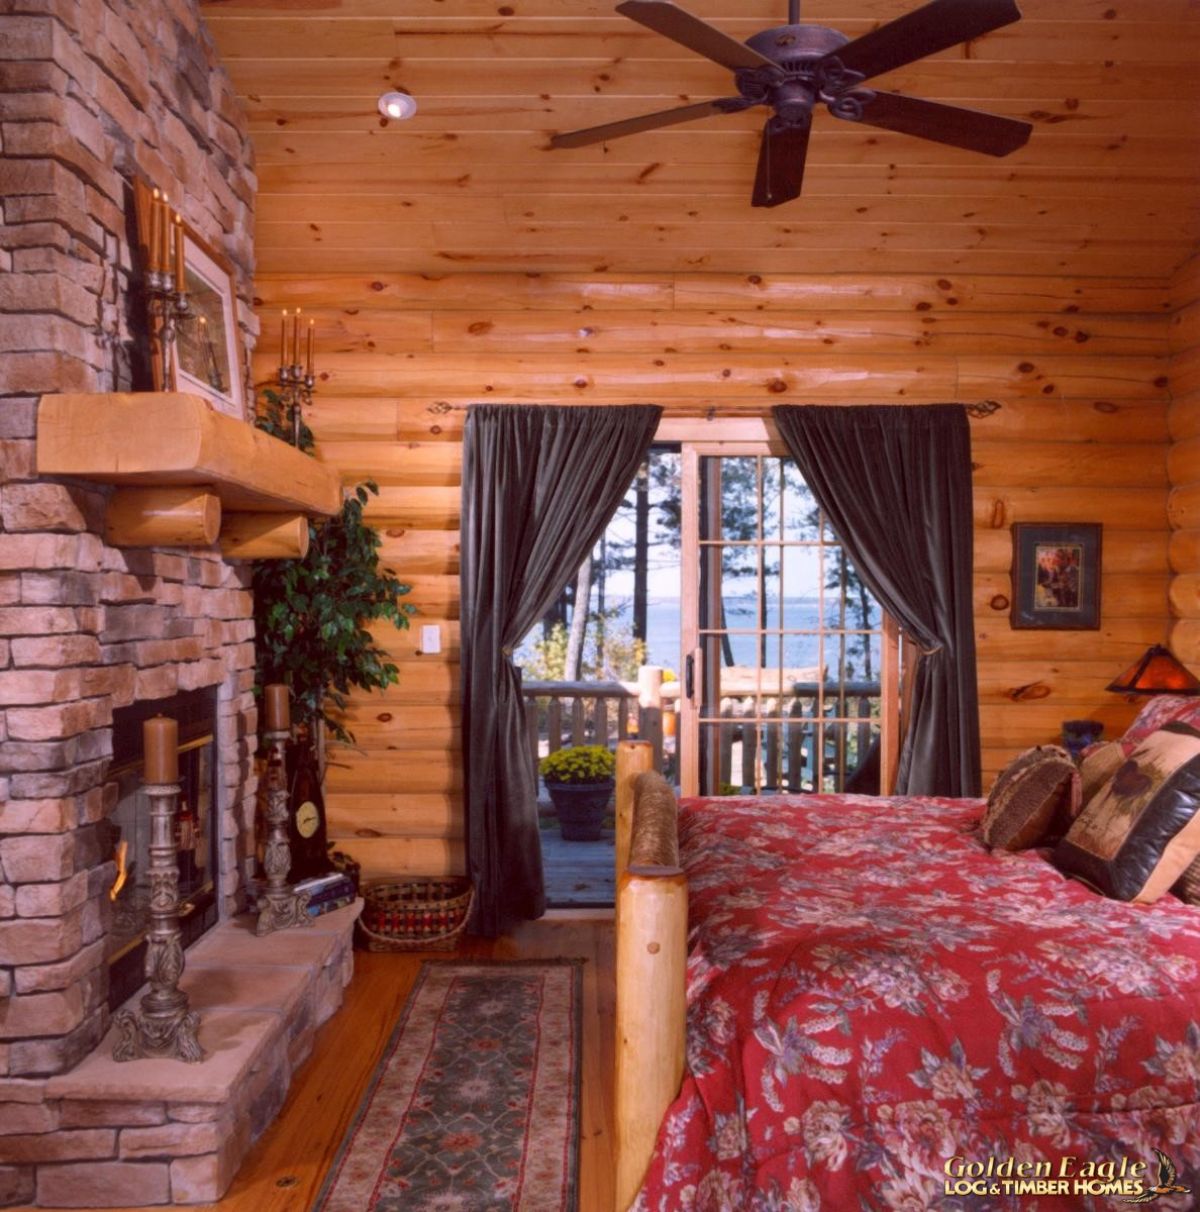 red bedding on wood bed with fireplace across from it and french doors in background